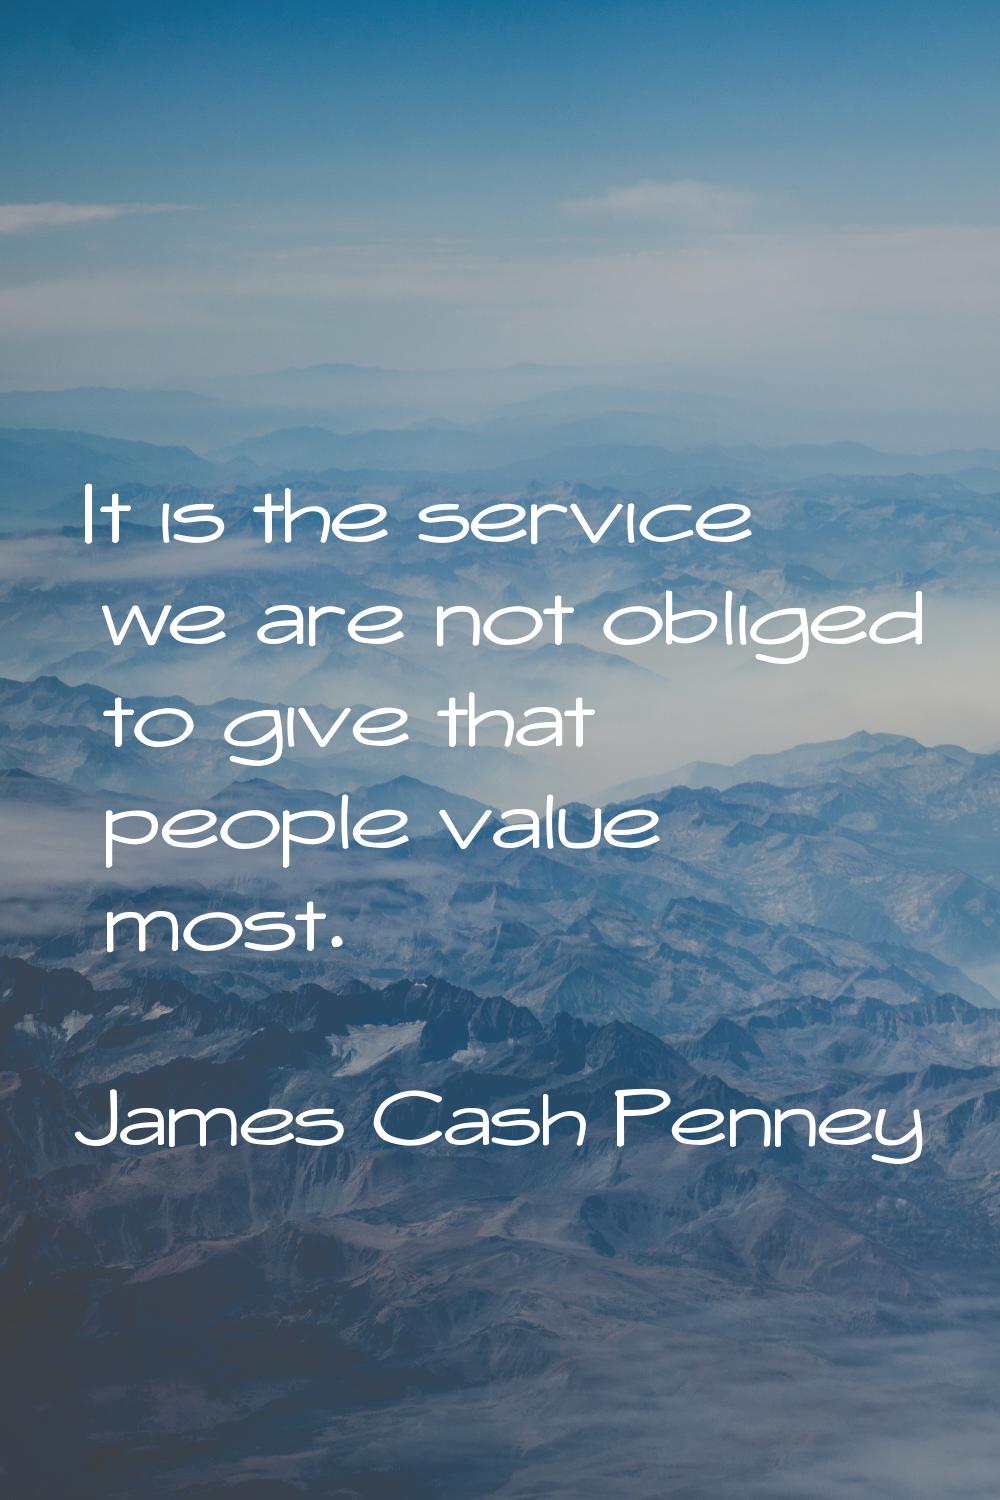 It is the service we are not obliged to give that people value most.